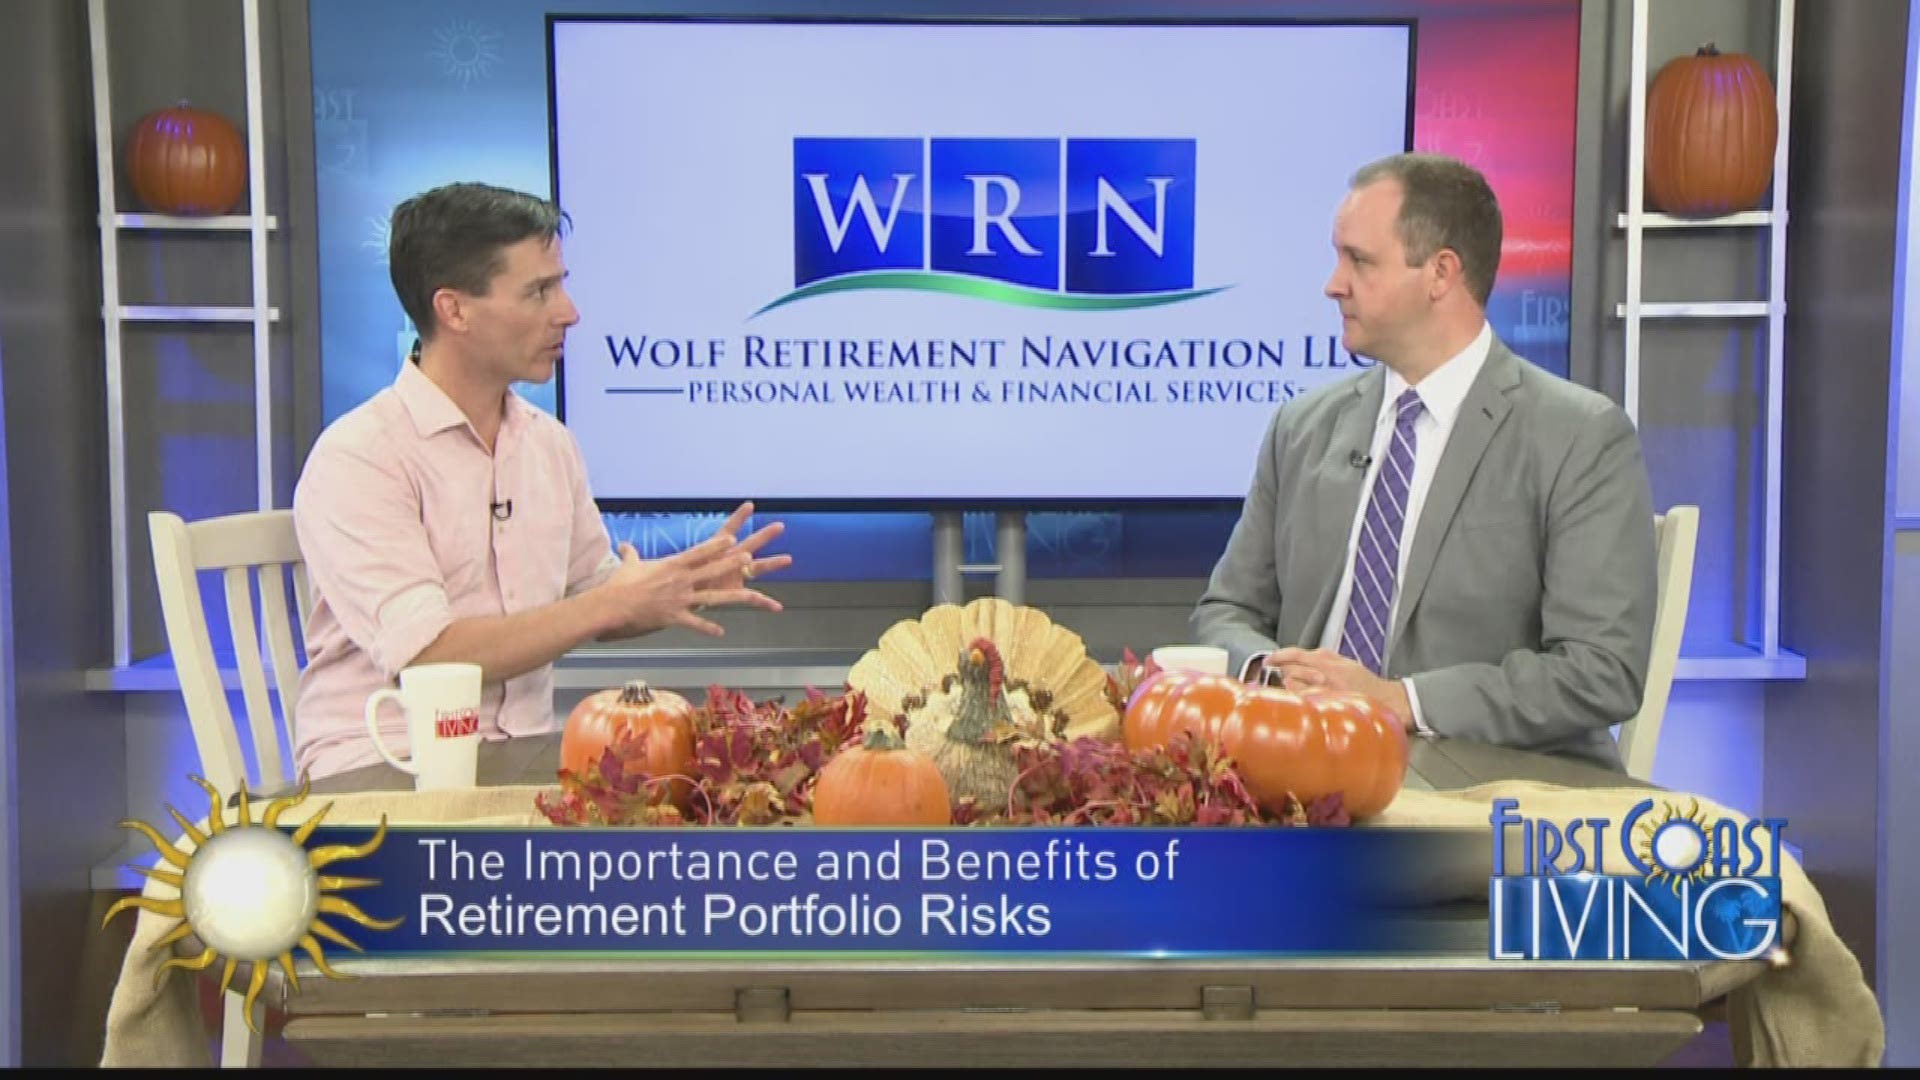 Anxious about retirement? Wolf Retirement Navigation can help you.